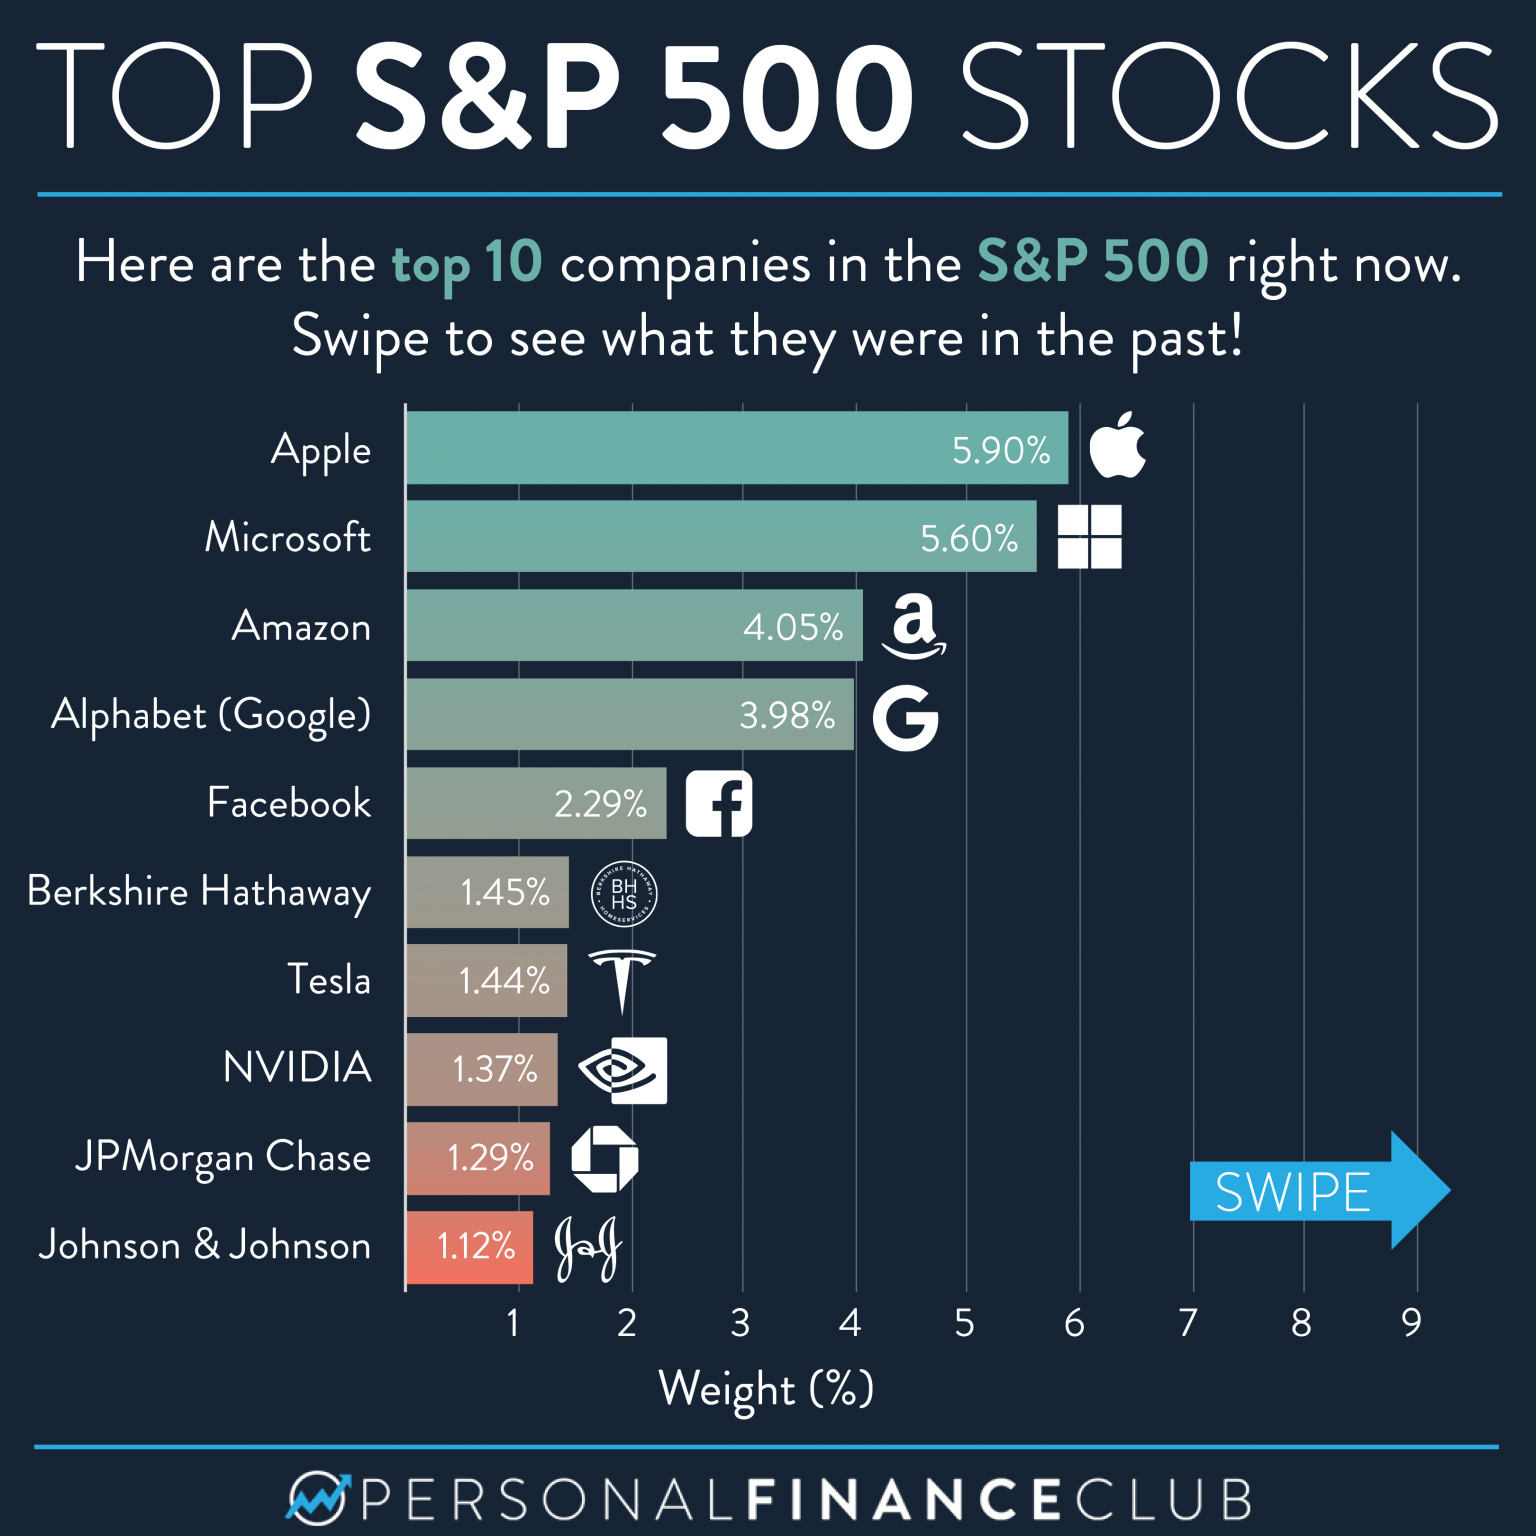 Is S&P 500 the biggest?